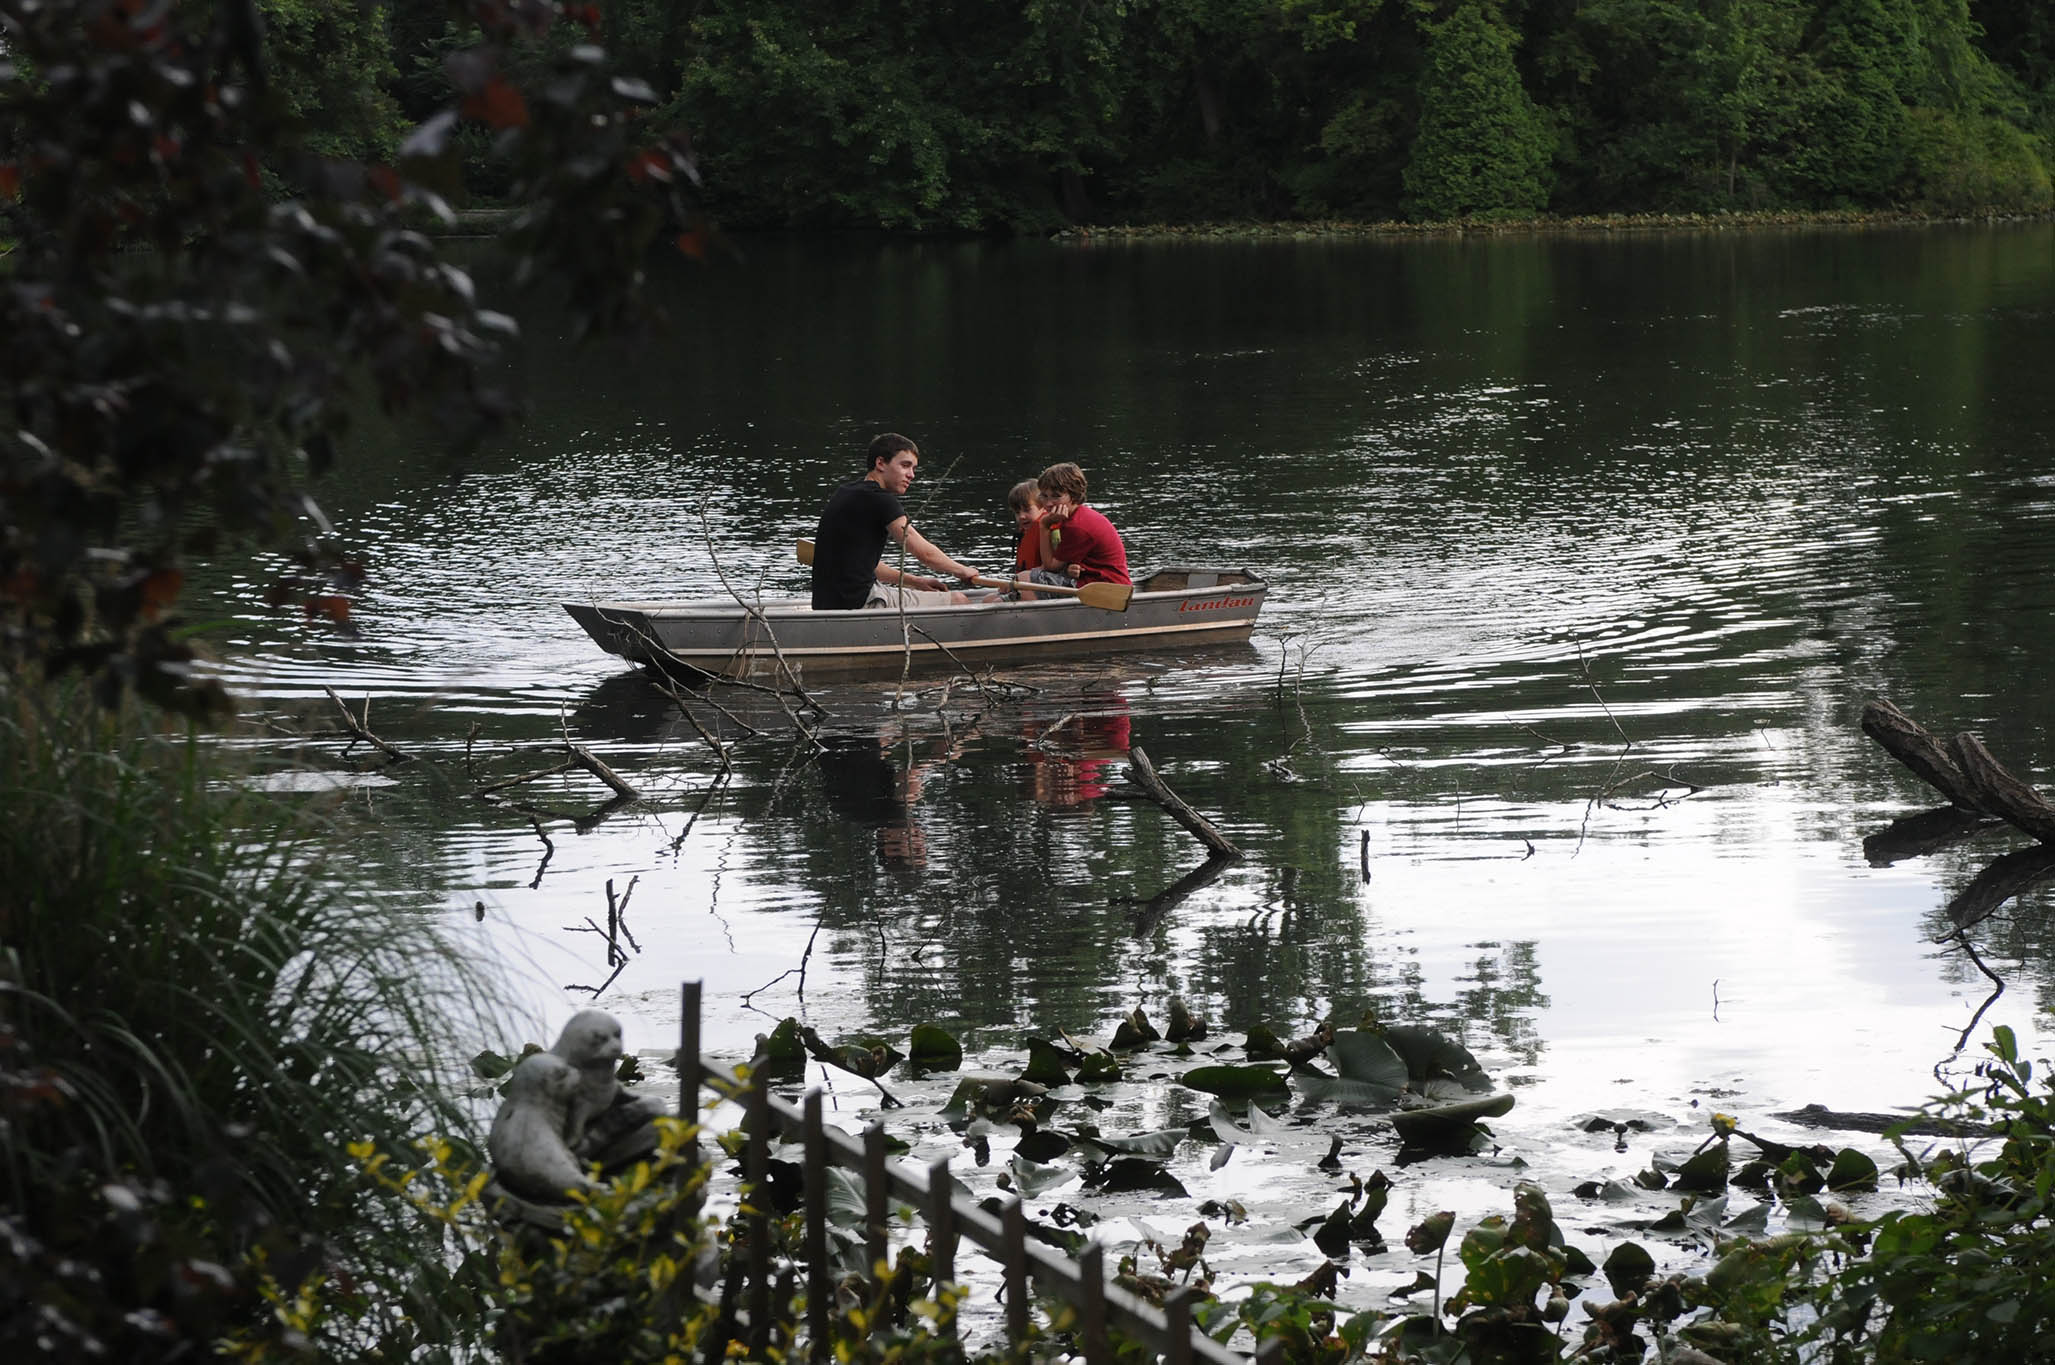 Three young boys in a rowboat on a small pond surrounded by trees and foliage.